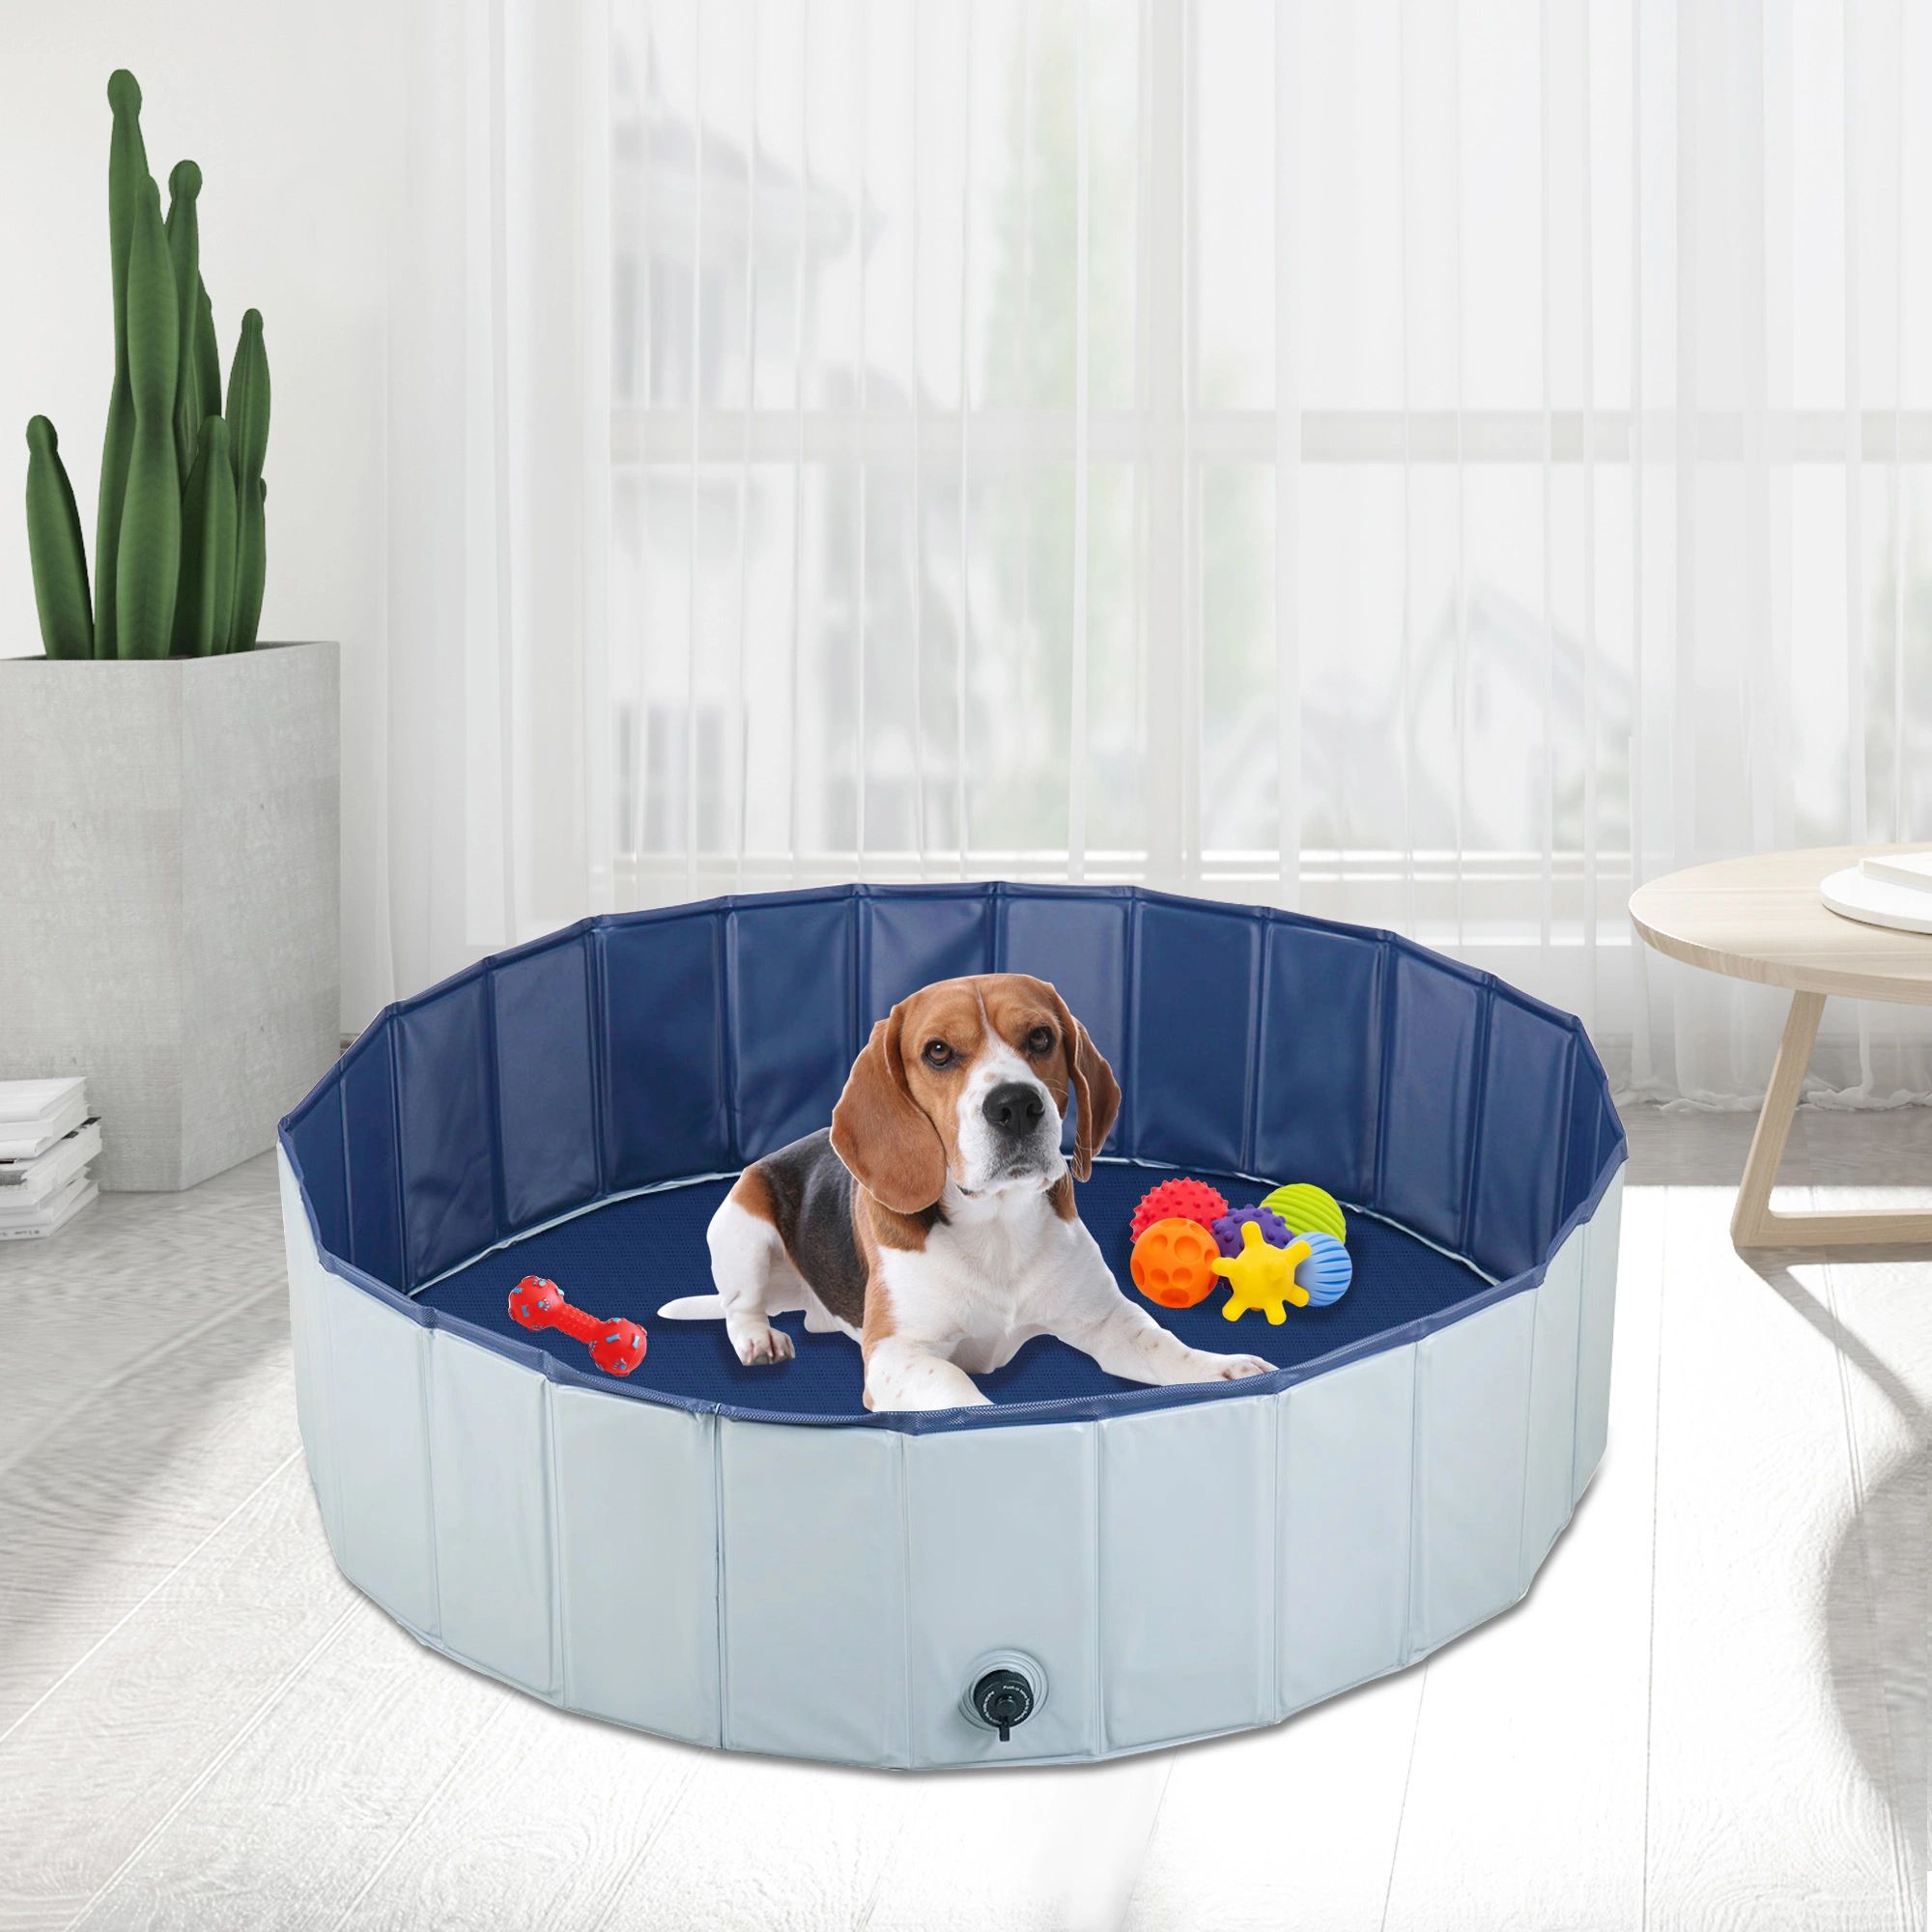 Foldable Pet Bath Pool, Collapsible Dog Bathing Tub, Kiddie and Toy Pool for Dogs Cats and Kids-CASAINC